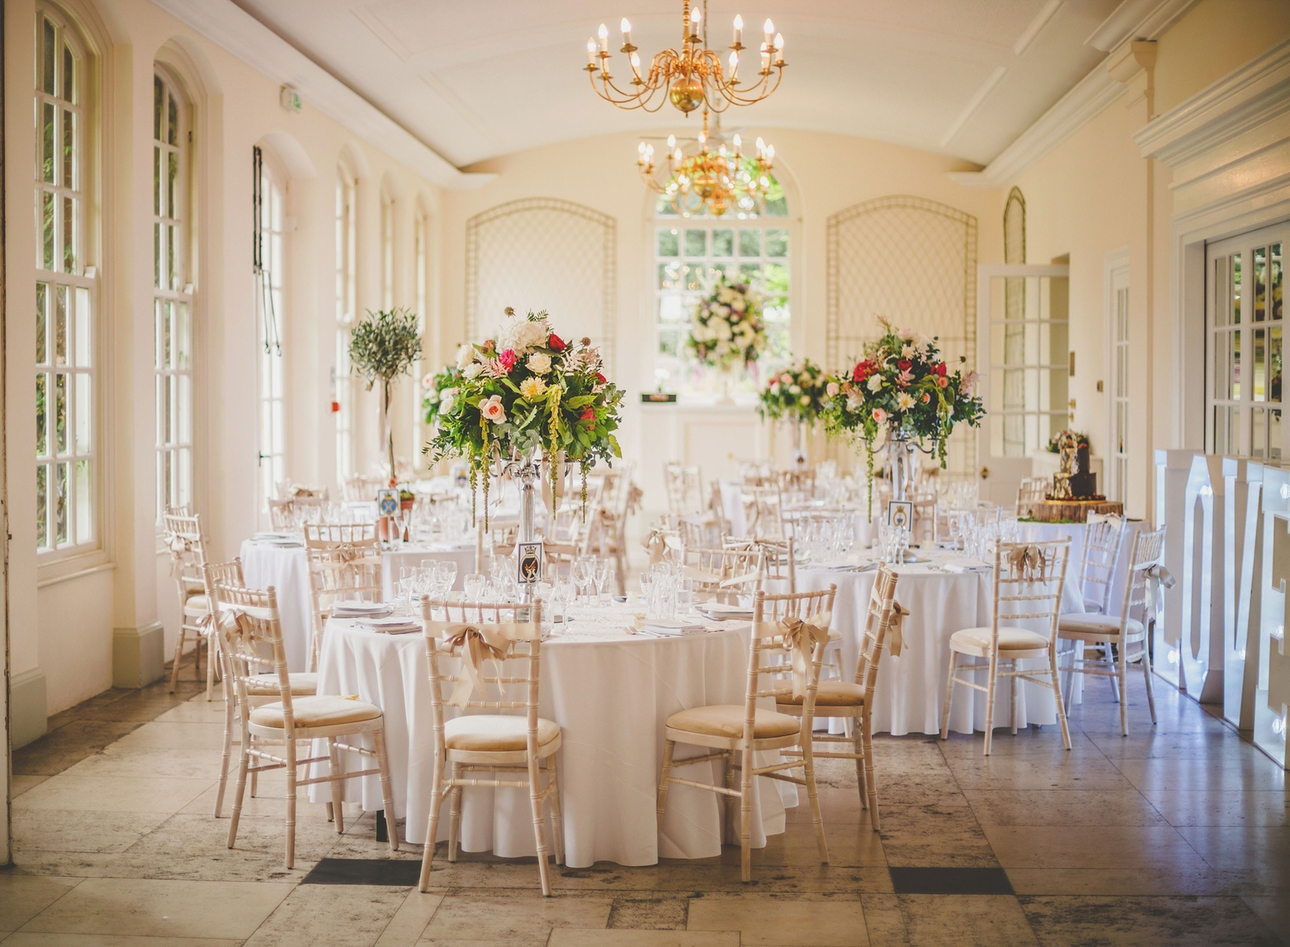 We love The Orangery at Goldney House in Bristol: Image 1